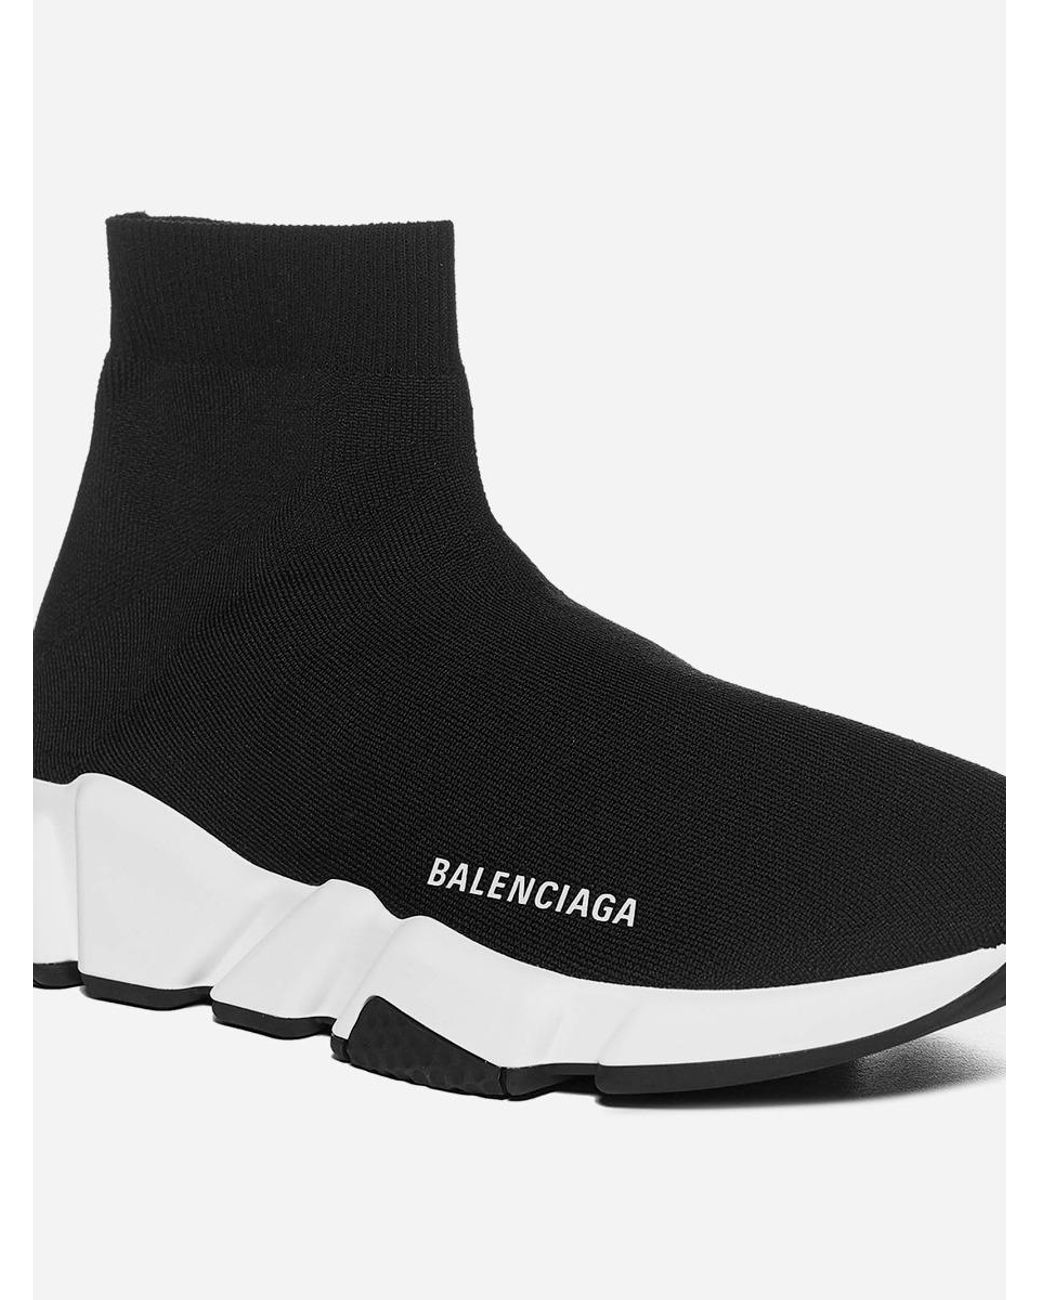 Balenciaga Speed Lt Stretch Knit Sneakers in Black,White (White) - Save 4%  | Lyst